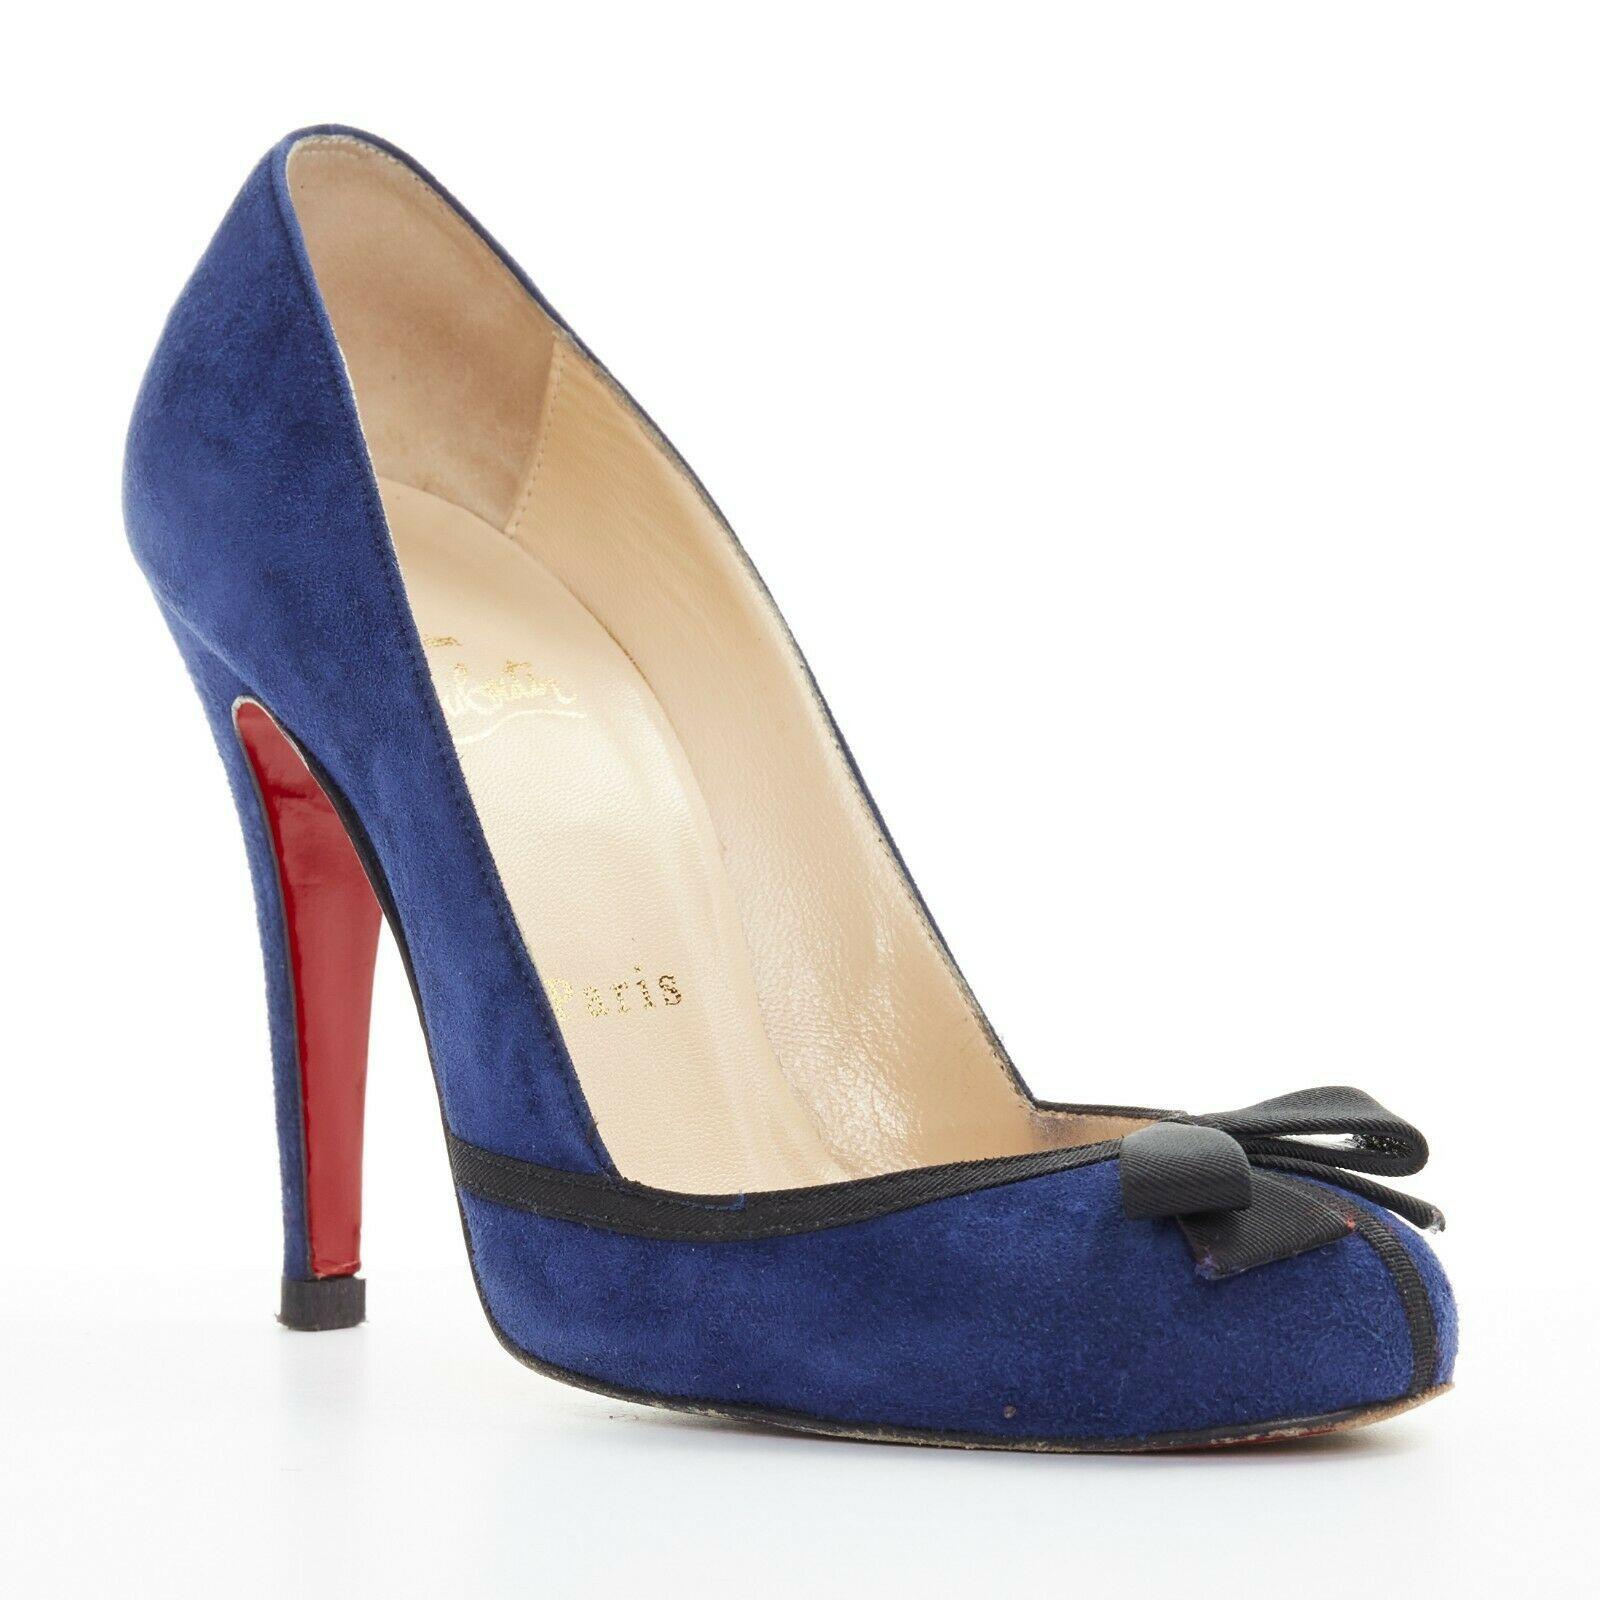 CHRISTIAN LOUBOUTIN Lavalliere 100 blue suede bow detail round toe pump EU36.5

CHRISTIAN LOUBOUTIN
Lavalliere 100. Dark blue suedeleather upper. Ribbon bow detail at toe. Round toe. Tonal stitching. Padded tan leather lining. Signature Christian